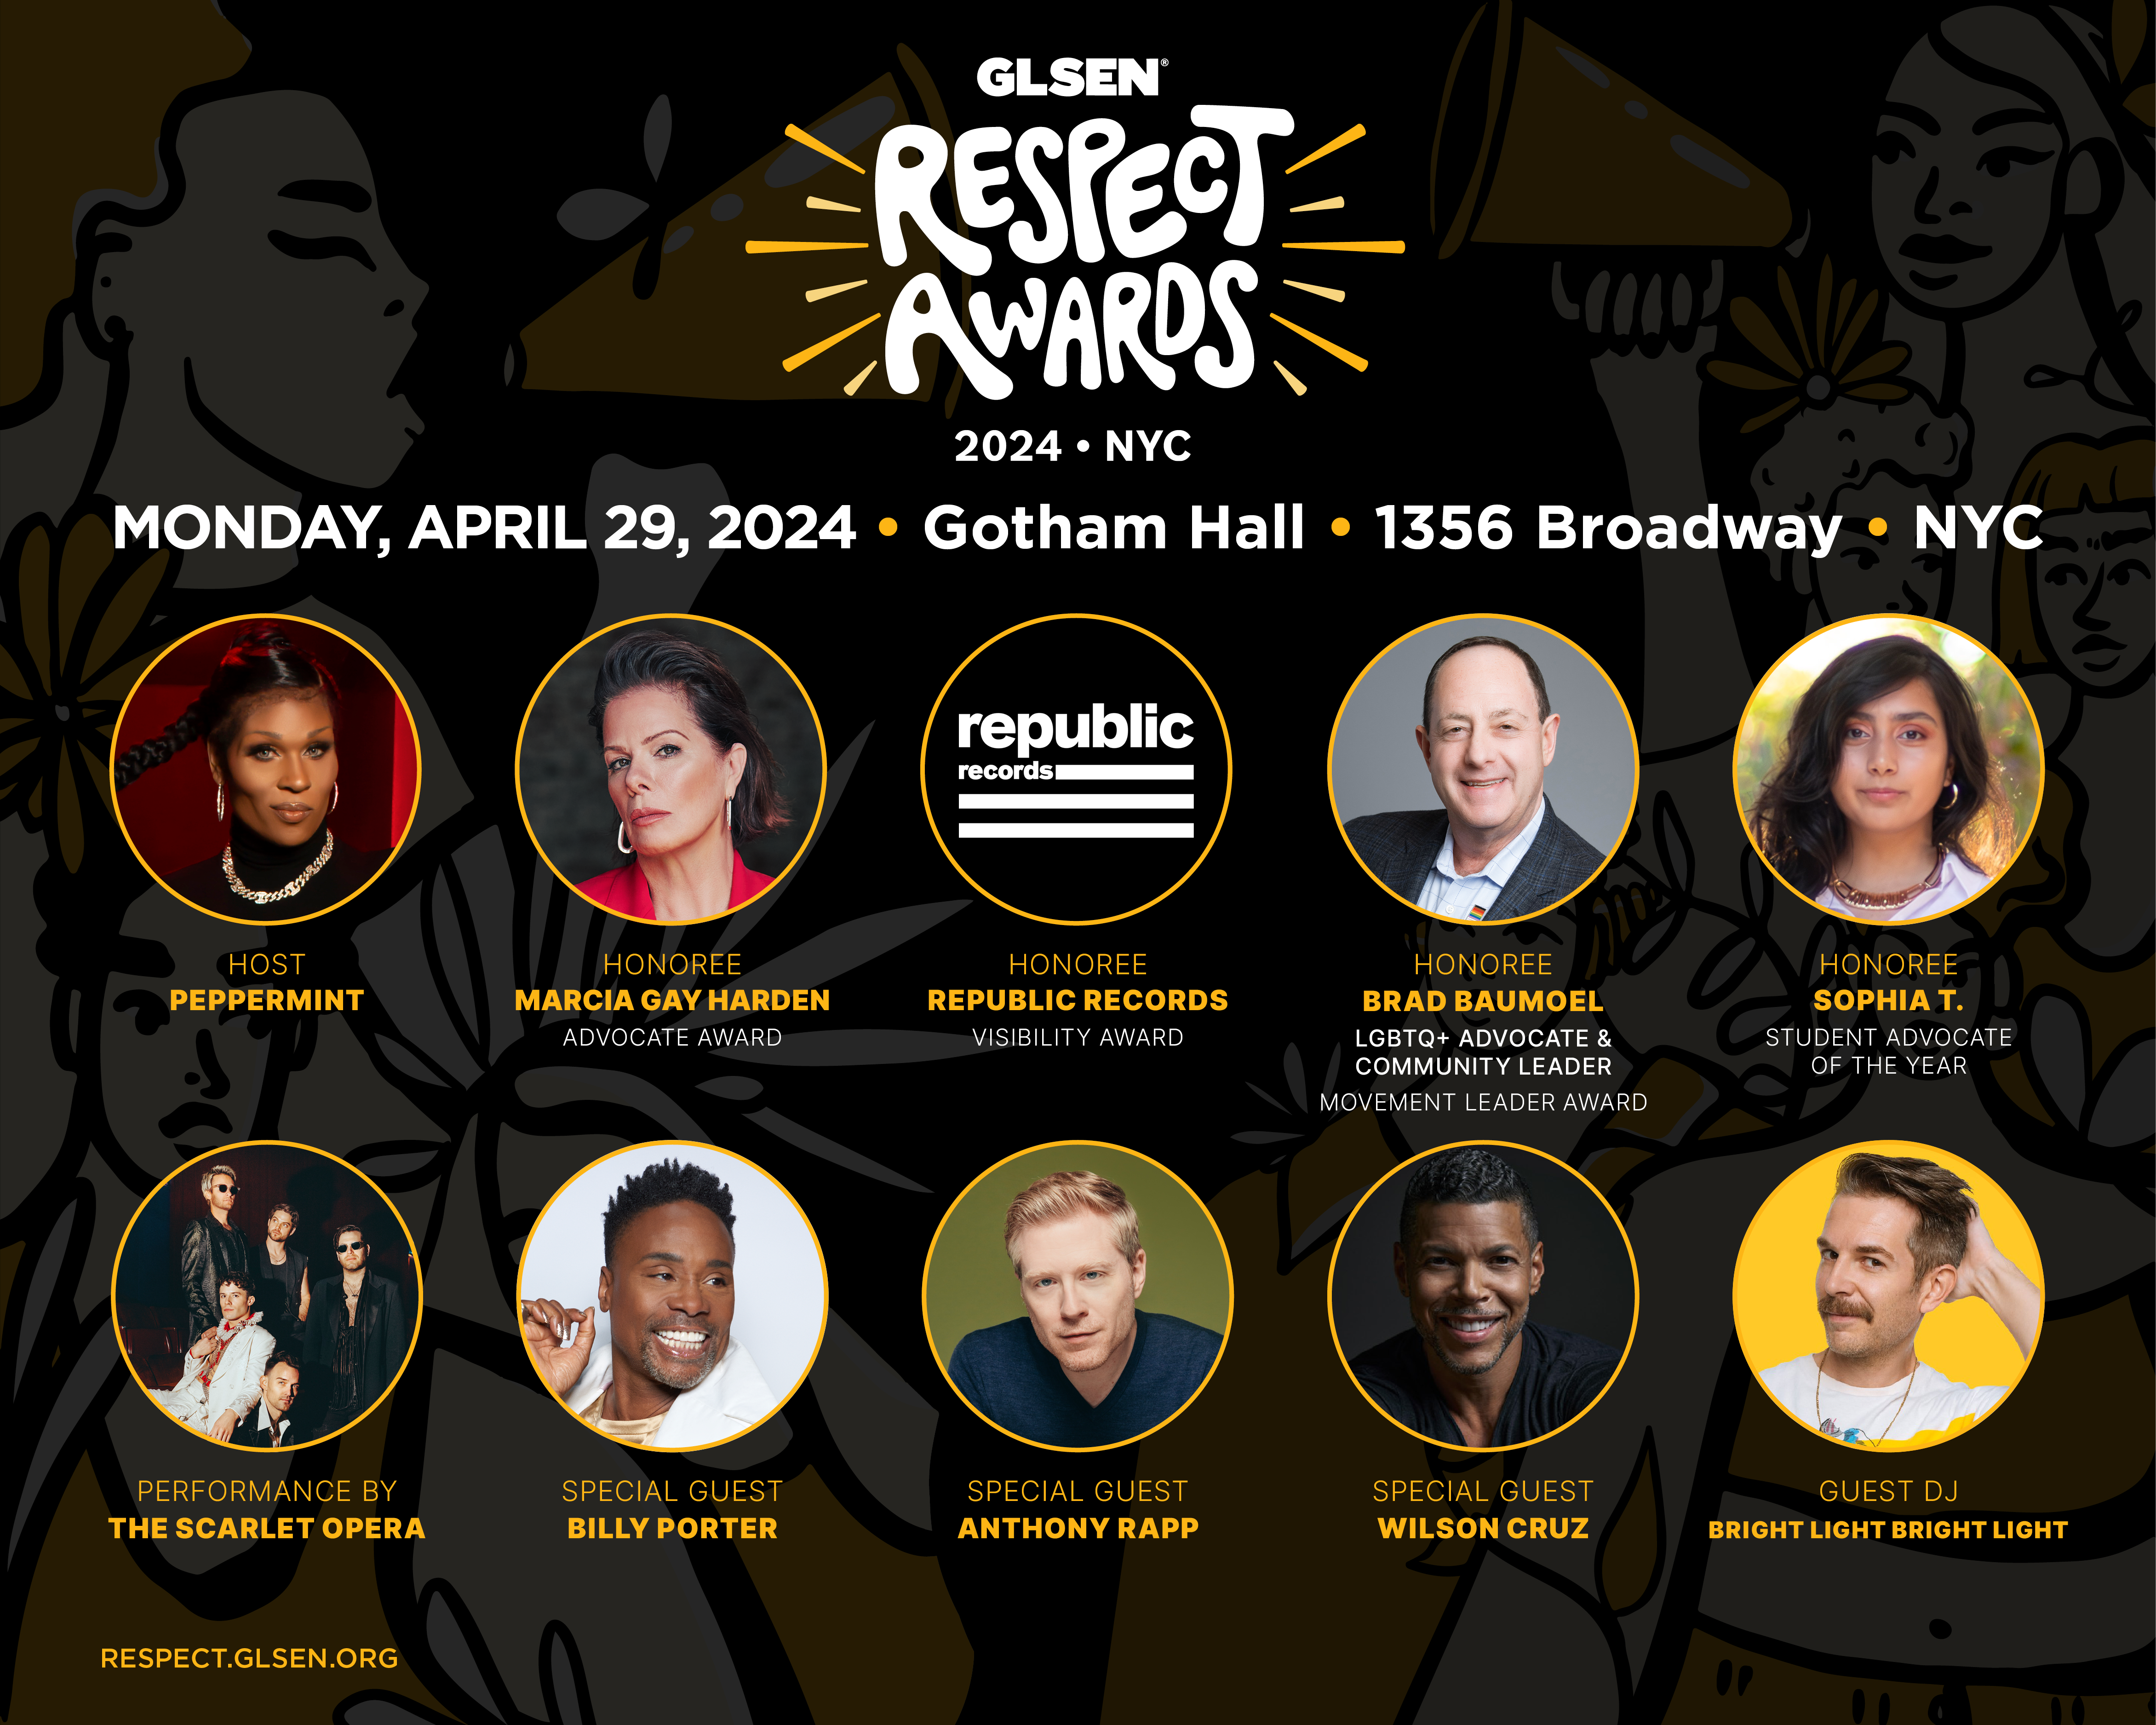 Respect NYC Awards on Monday April 29th!